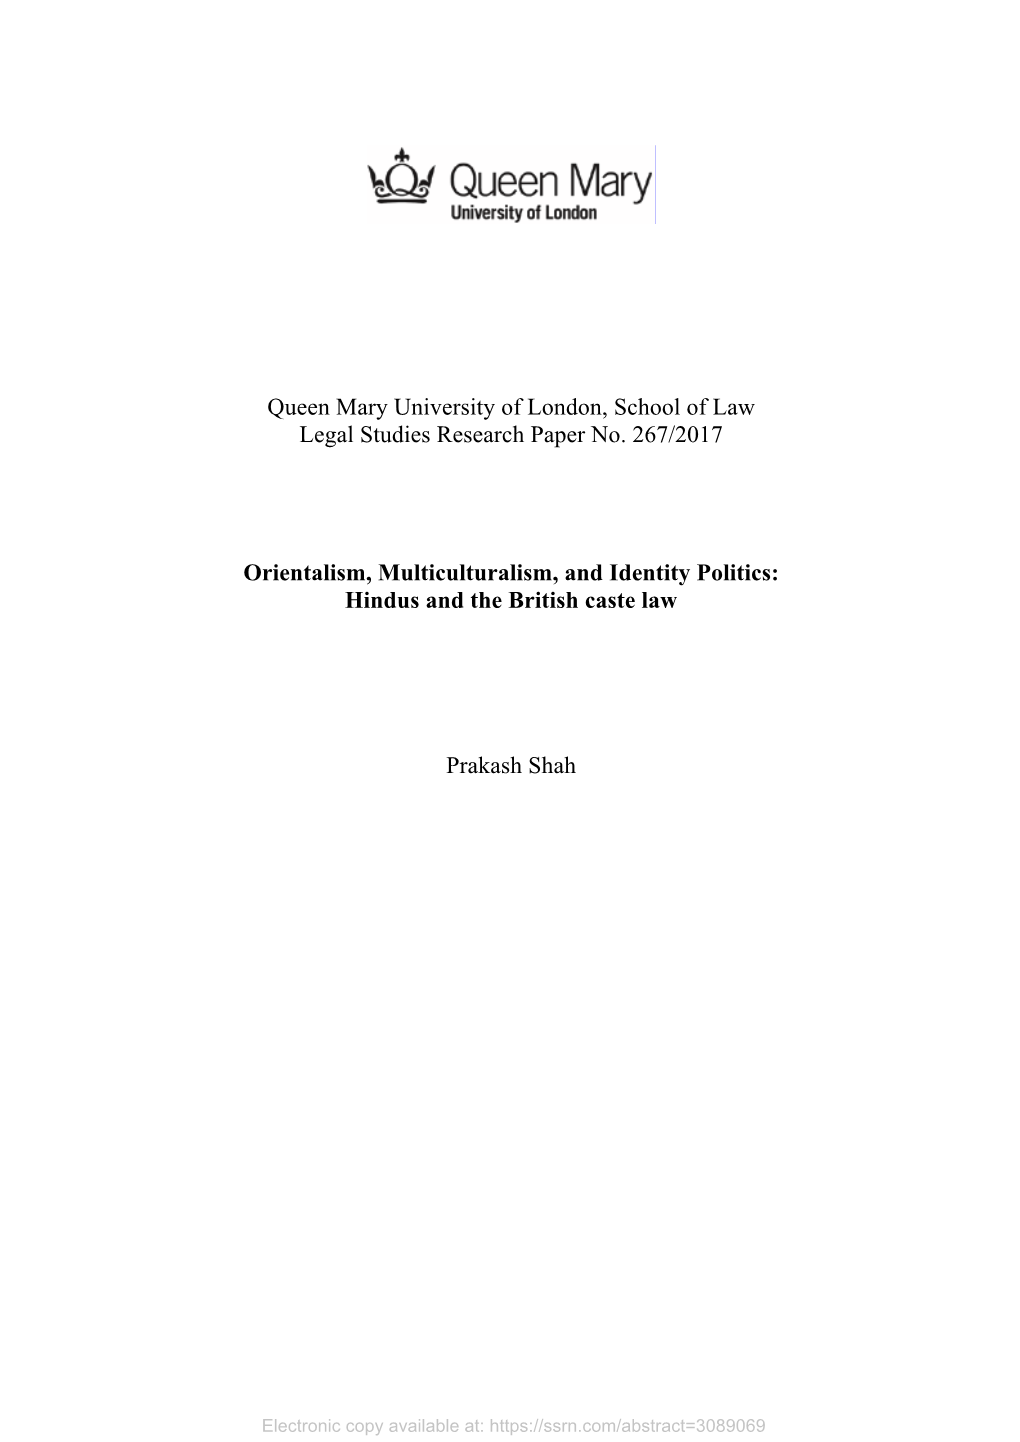 Queen Mary University of London, School of Law Legal Studies Research Paper No